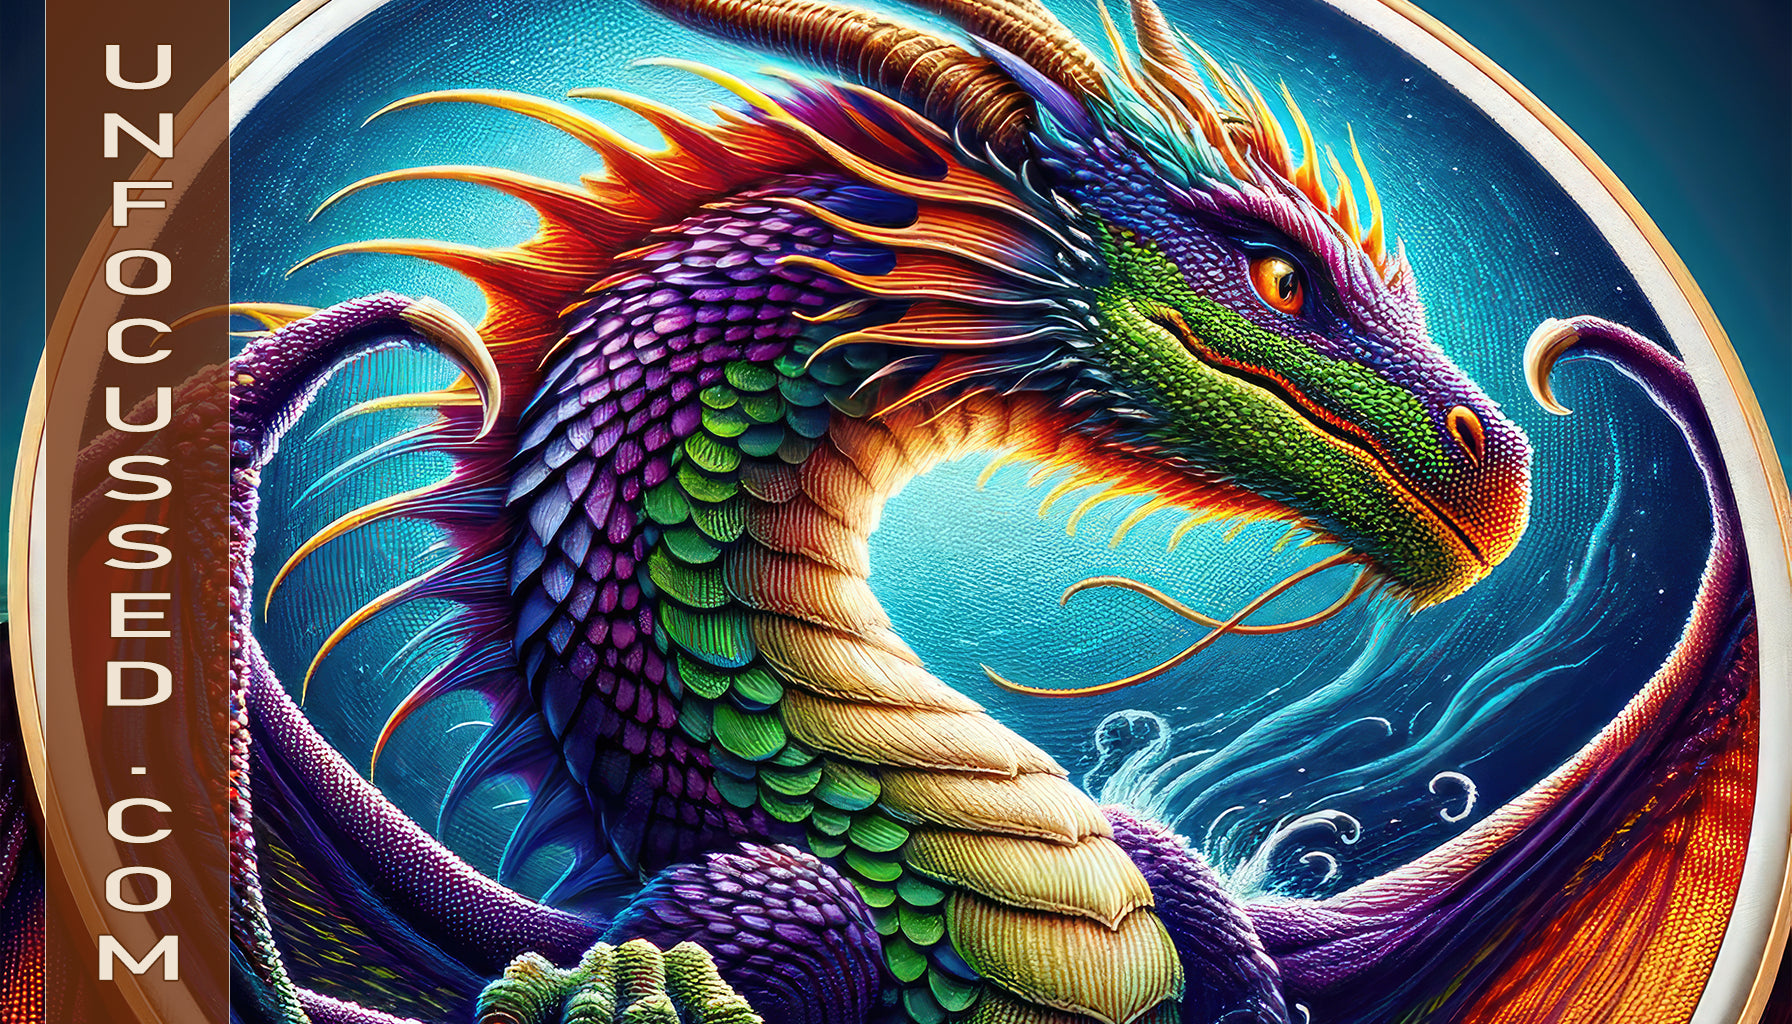 Fabric Fantasy: The Tale of the Living Dragon Embroidery